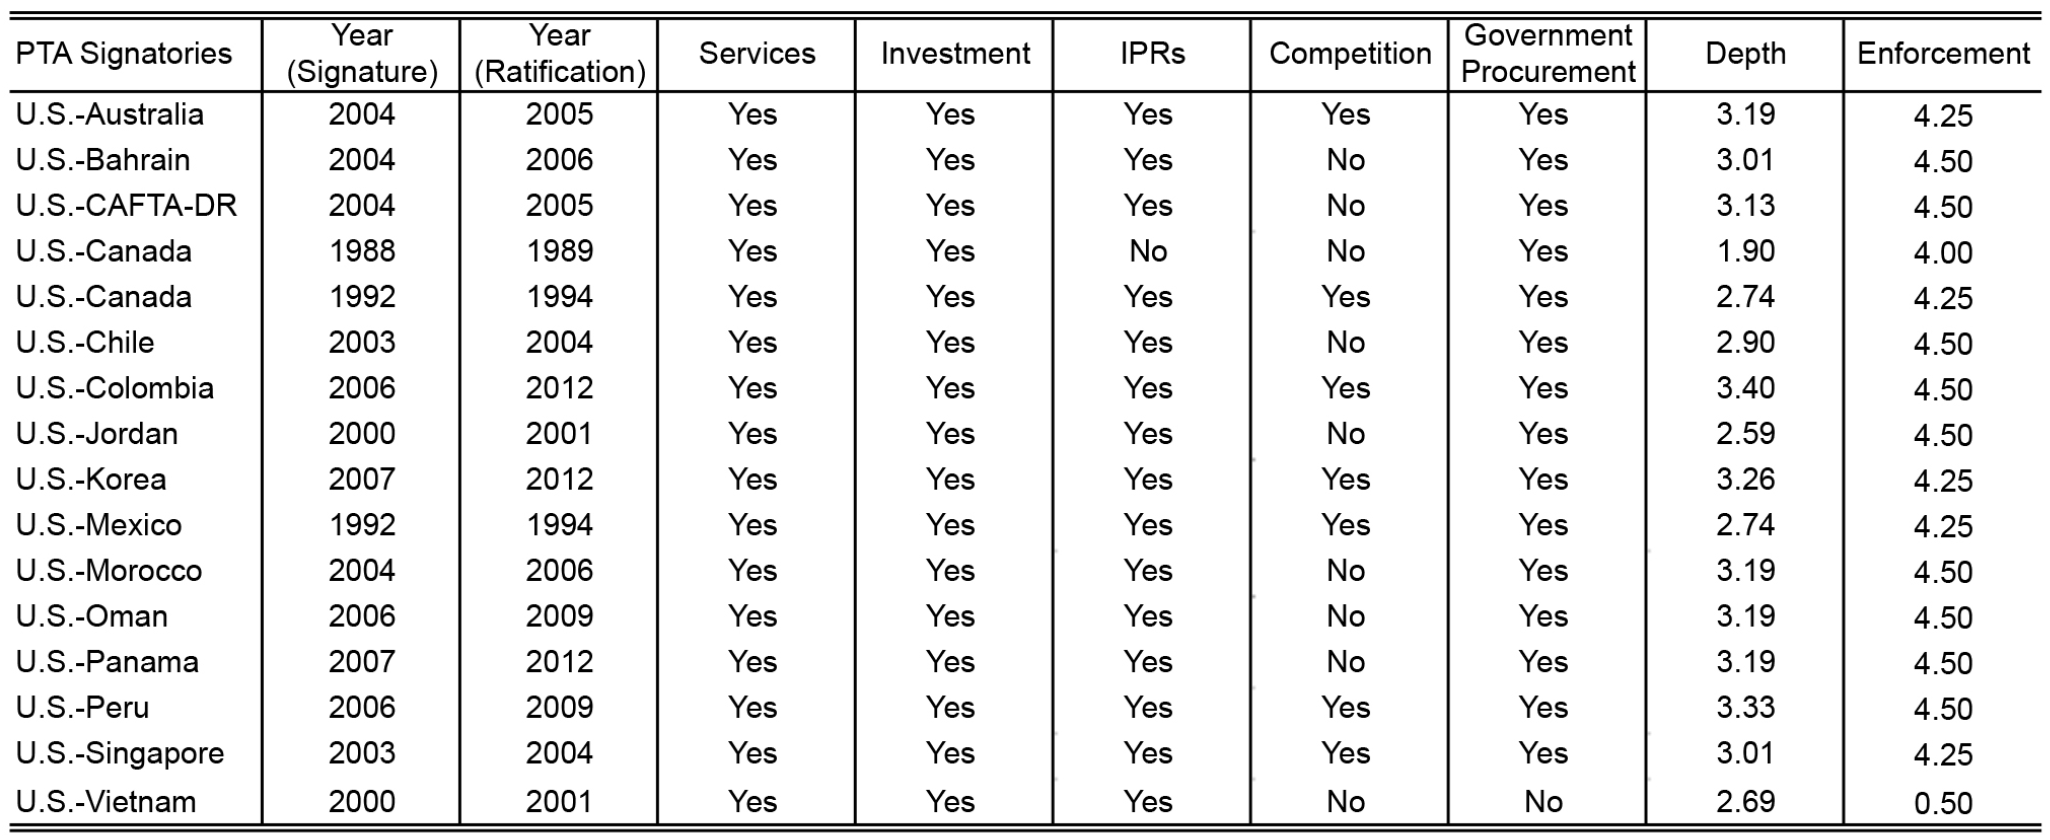 This table lists the designs of various U.S. PTAs.